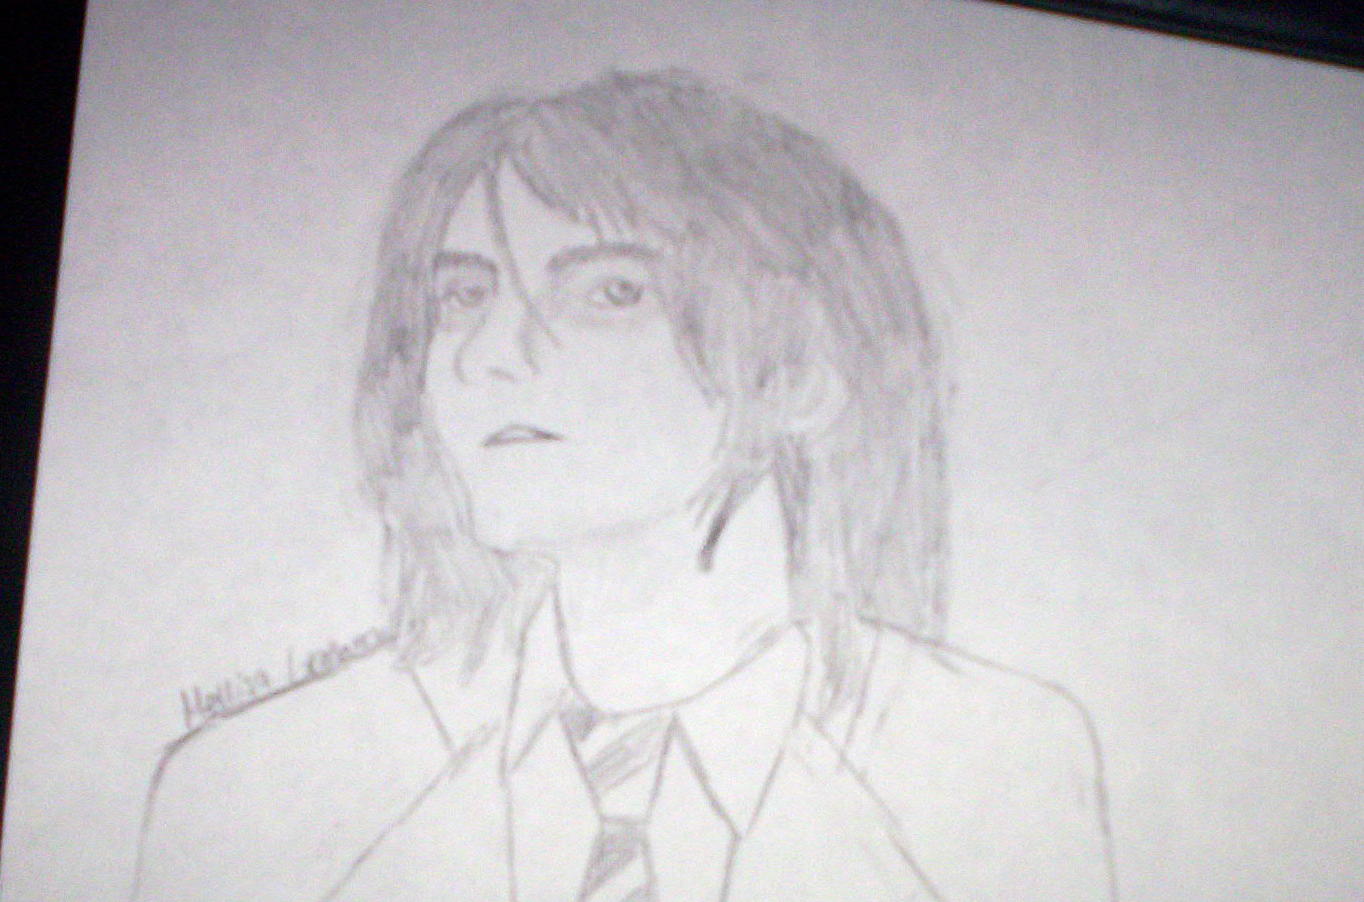 gerard way of my chemical romance by mellisagraham